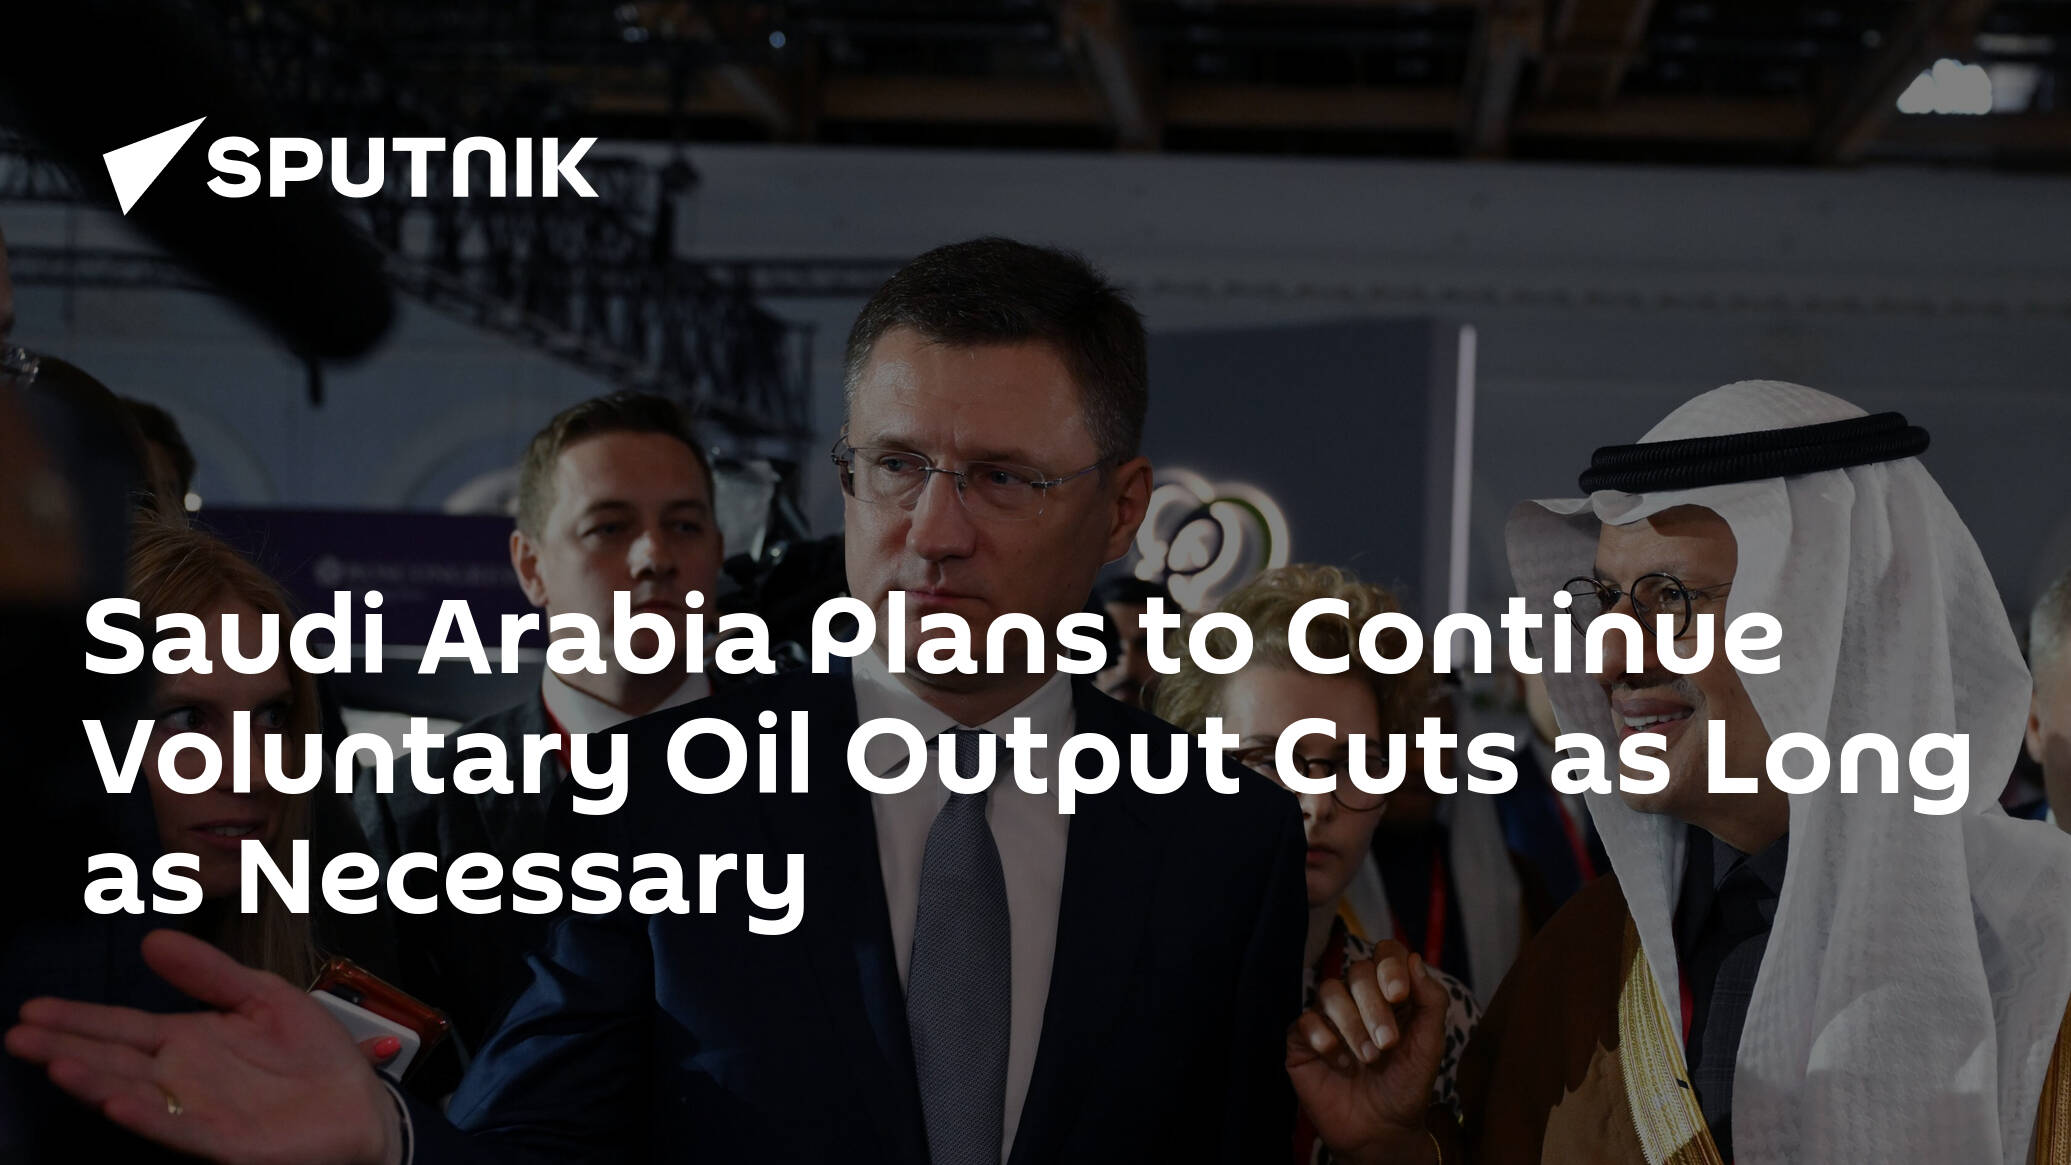 Saudi Arabia Plans to Continue Voluntary Oil Output Cuts as Long as Necessary